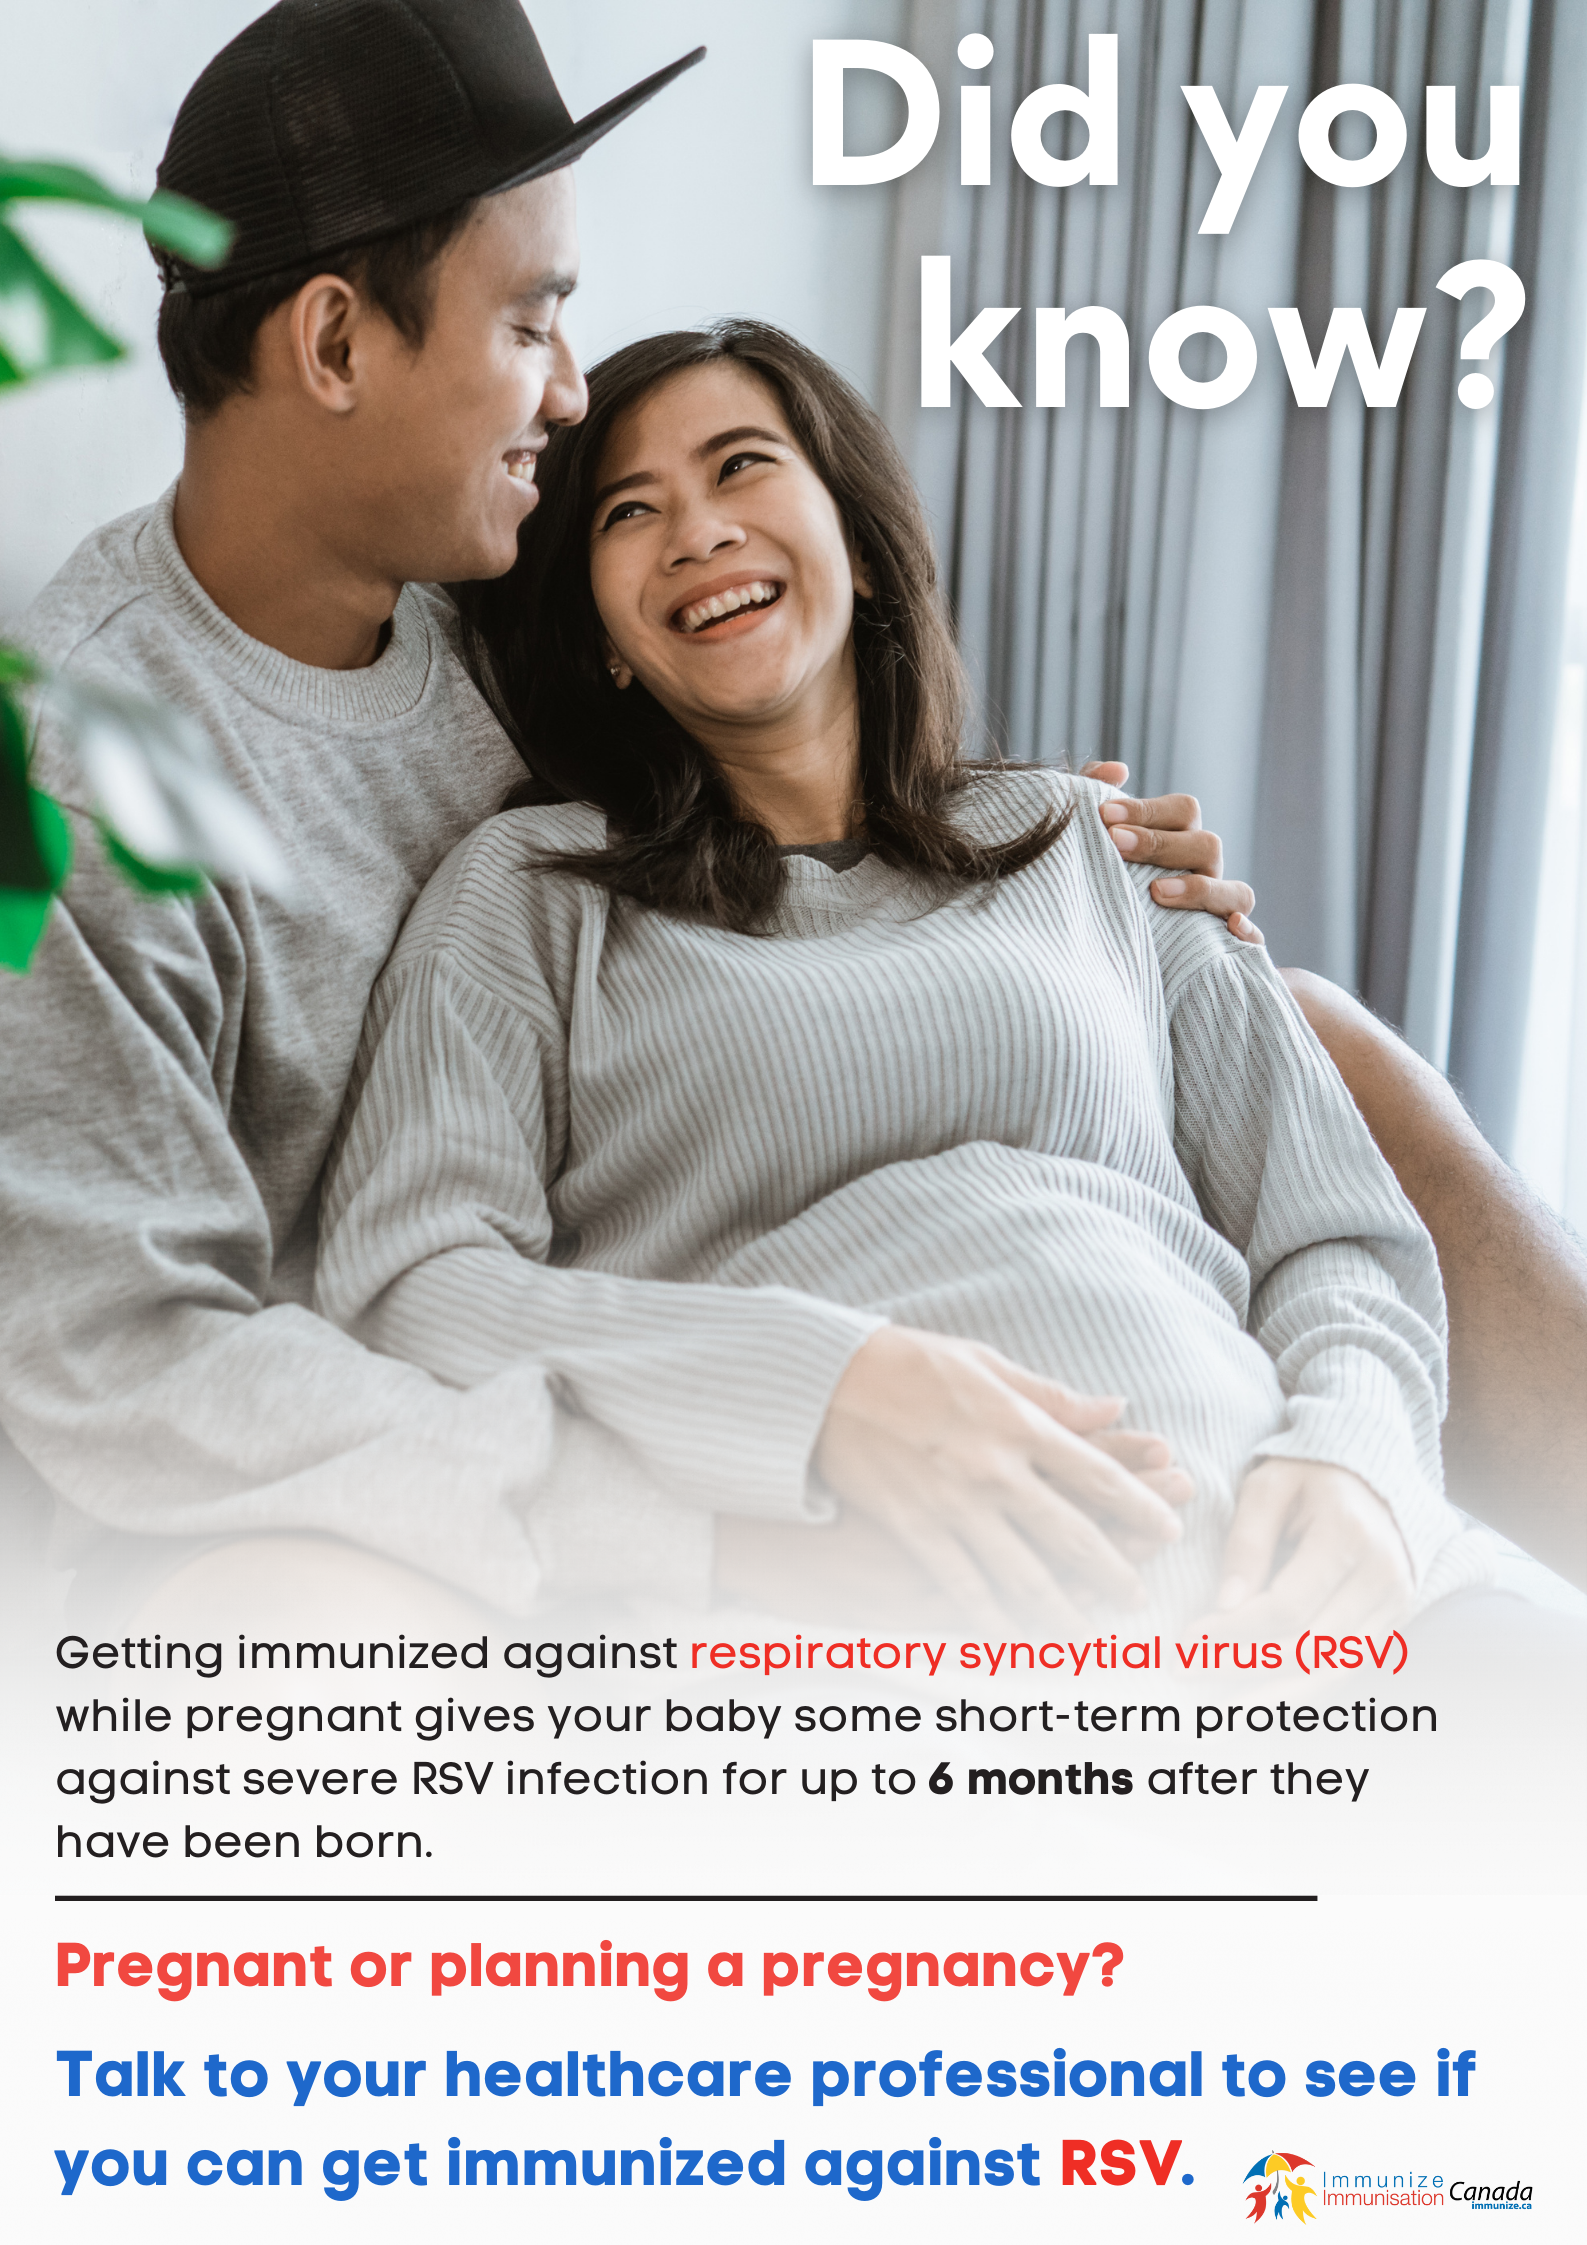 Did you know? Respiratory syncytial virus (RSV) immunization during pregnancy